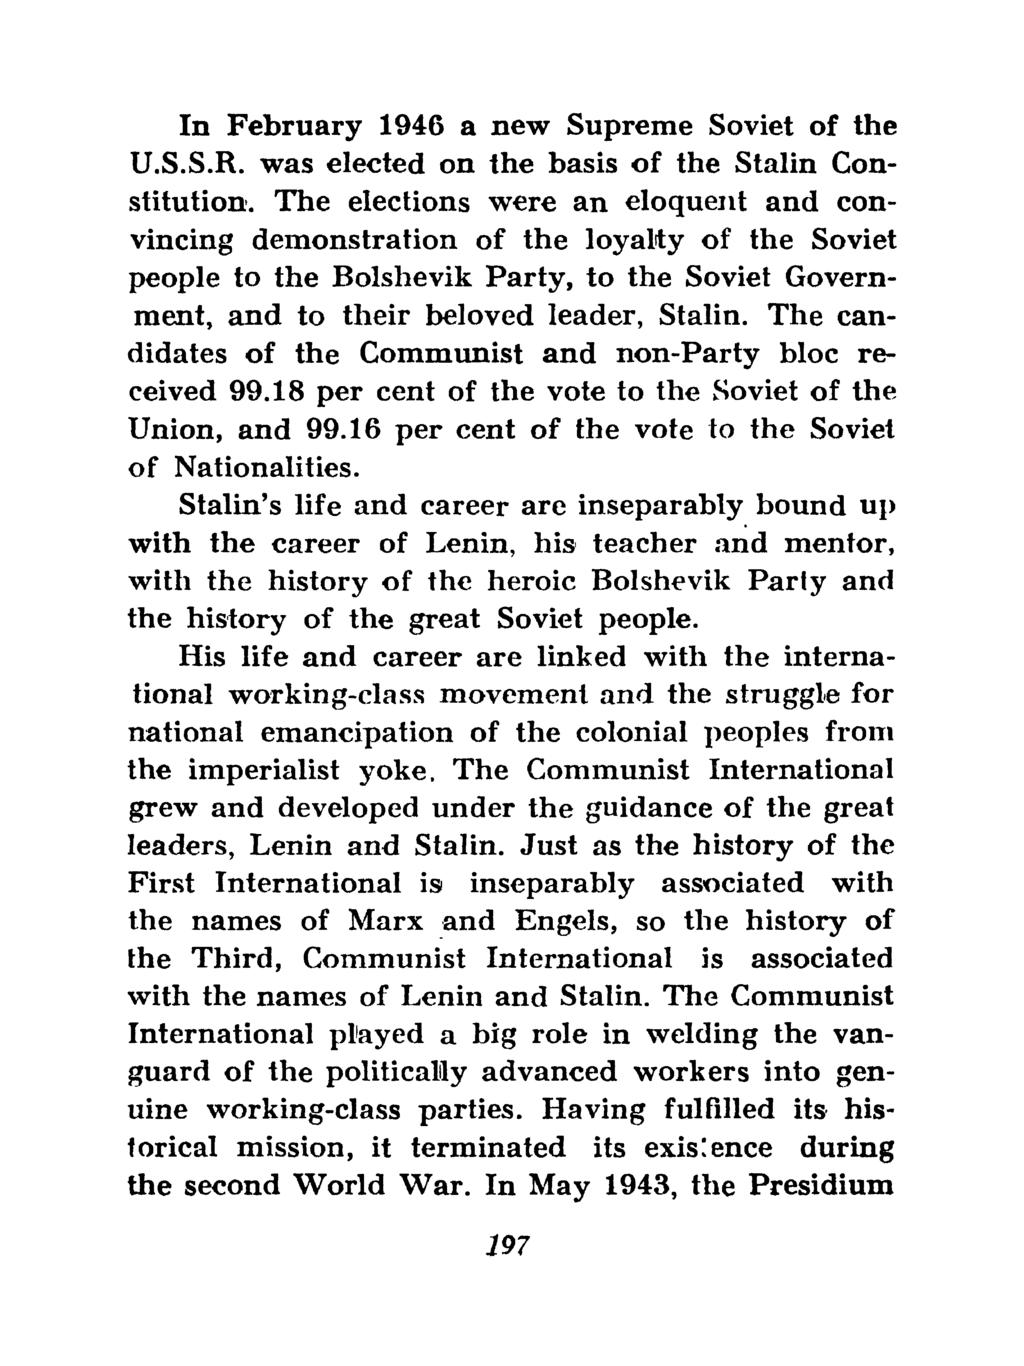 In February 1946 a new Supreme Soviet of the U.S.S.R. was elected on the basis of the Stalin Constitution.